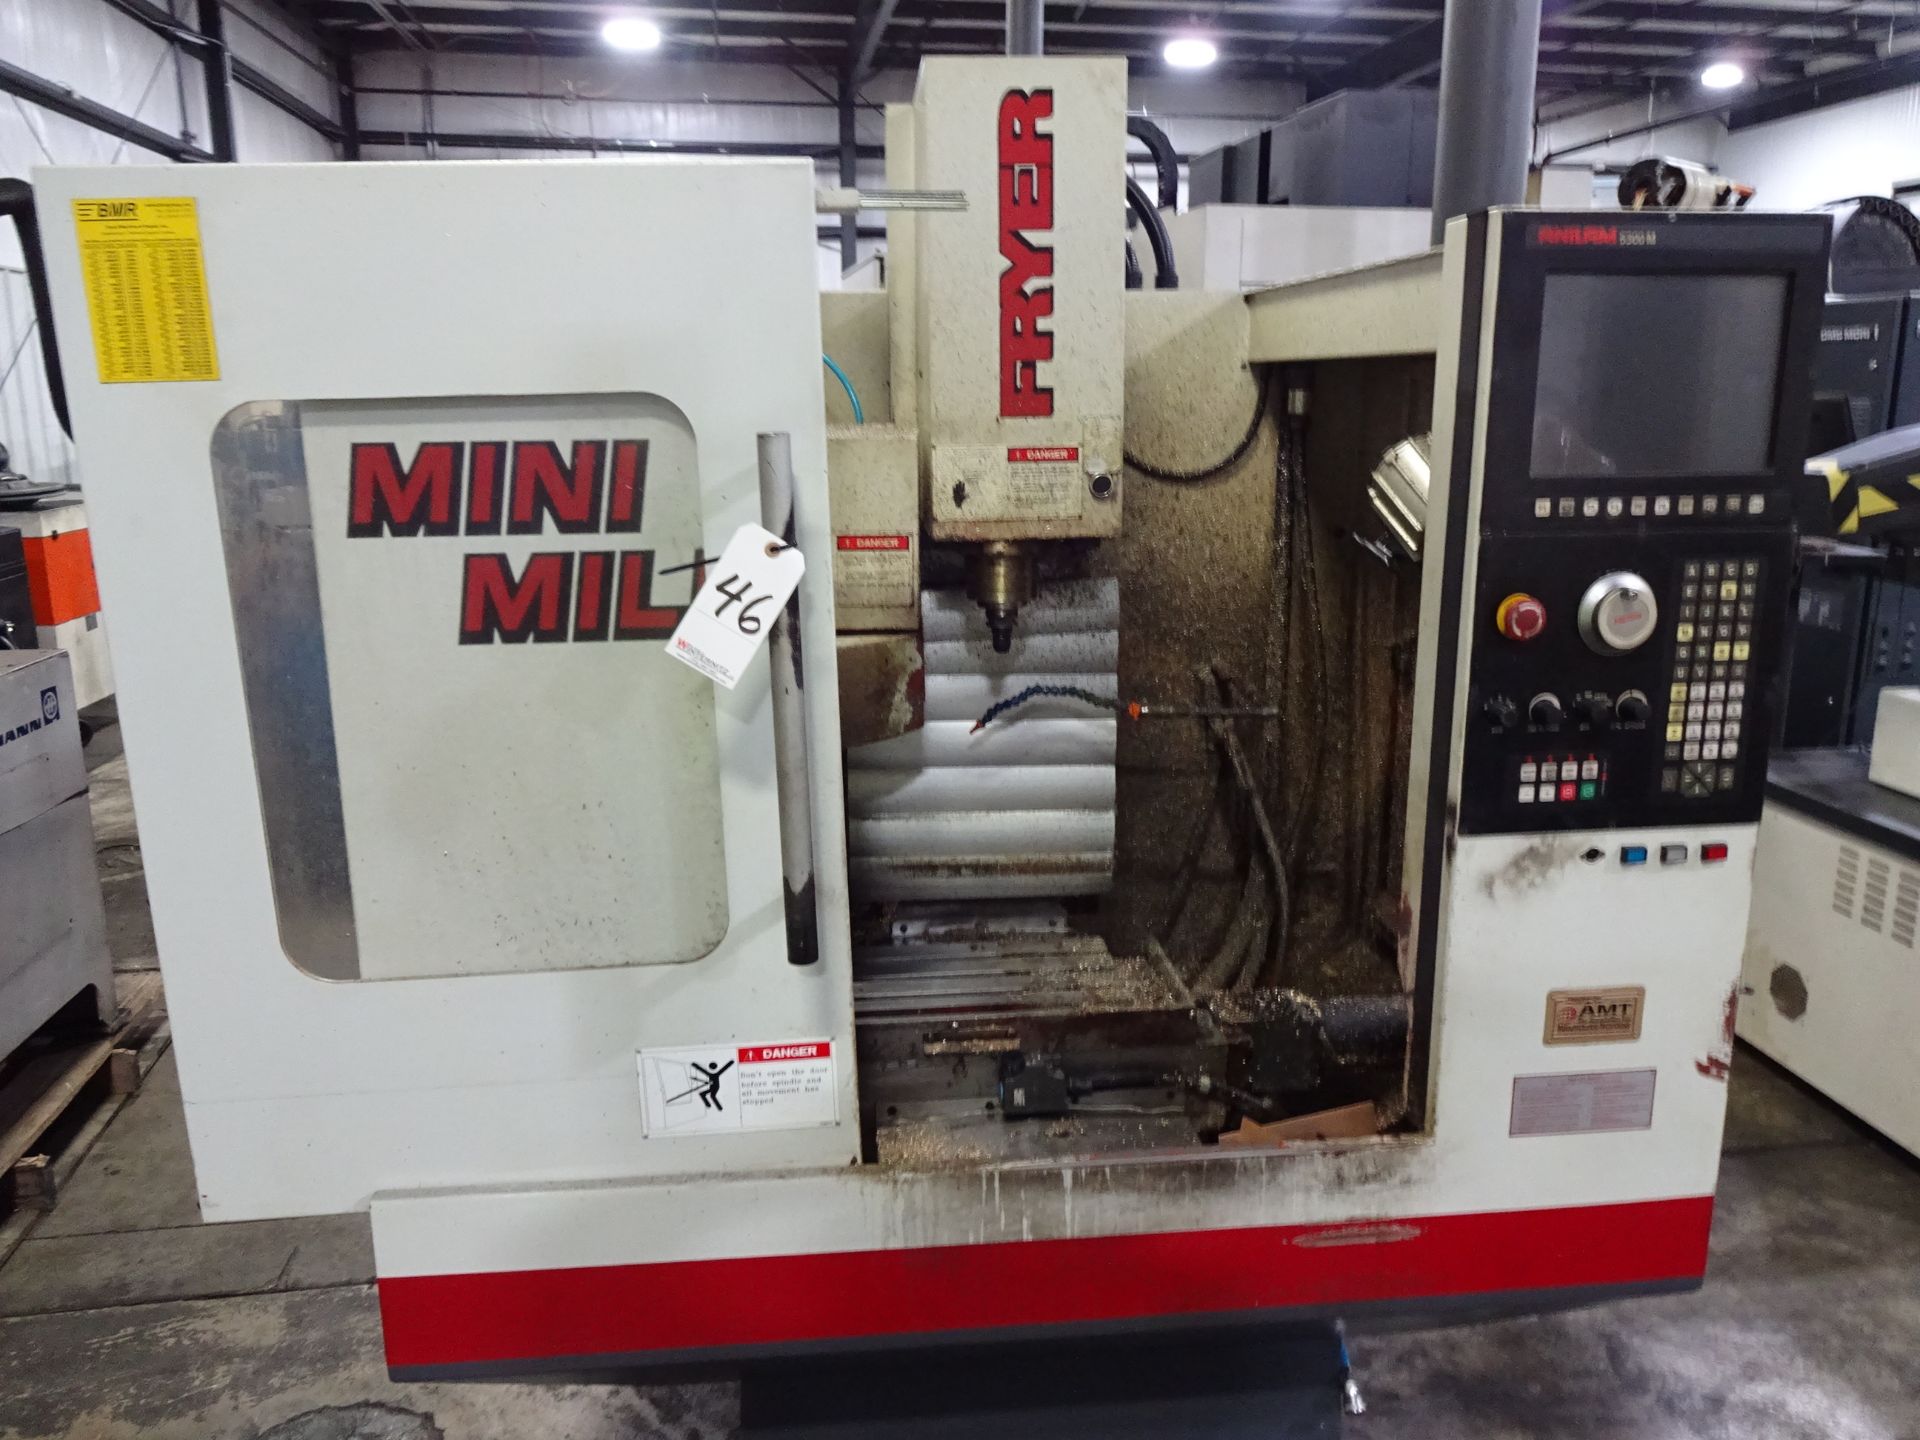 FRYER MODEL MM CNC MINI MILL, S/N 25022, 10 X 33 TABLE, ANILAM 5300M CONTROL (EXCLUDES TRANSFORMER)